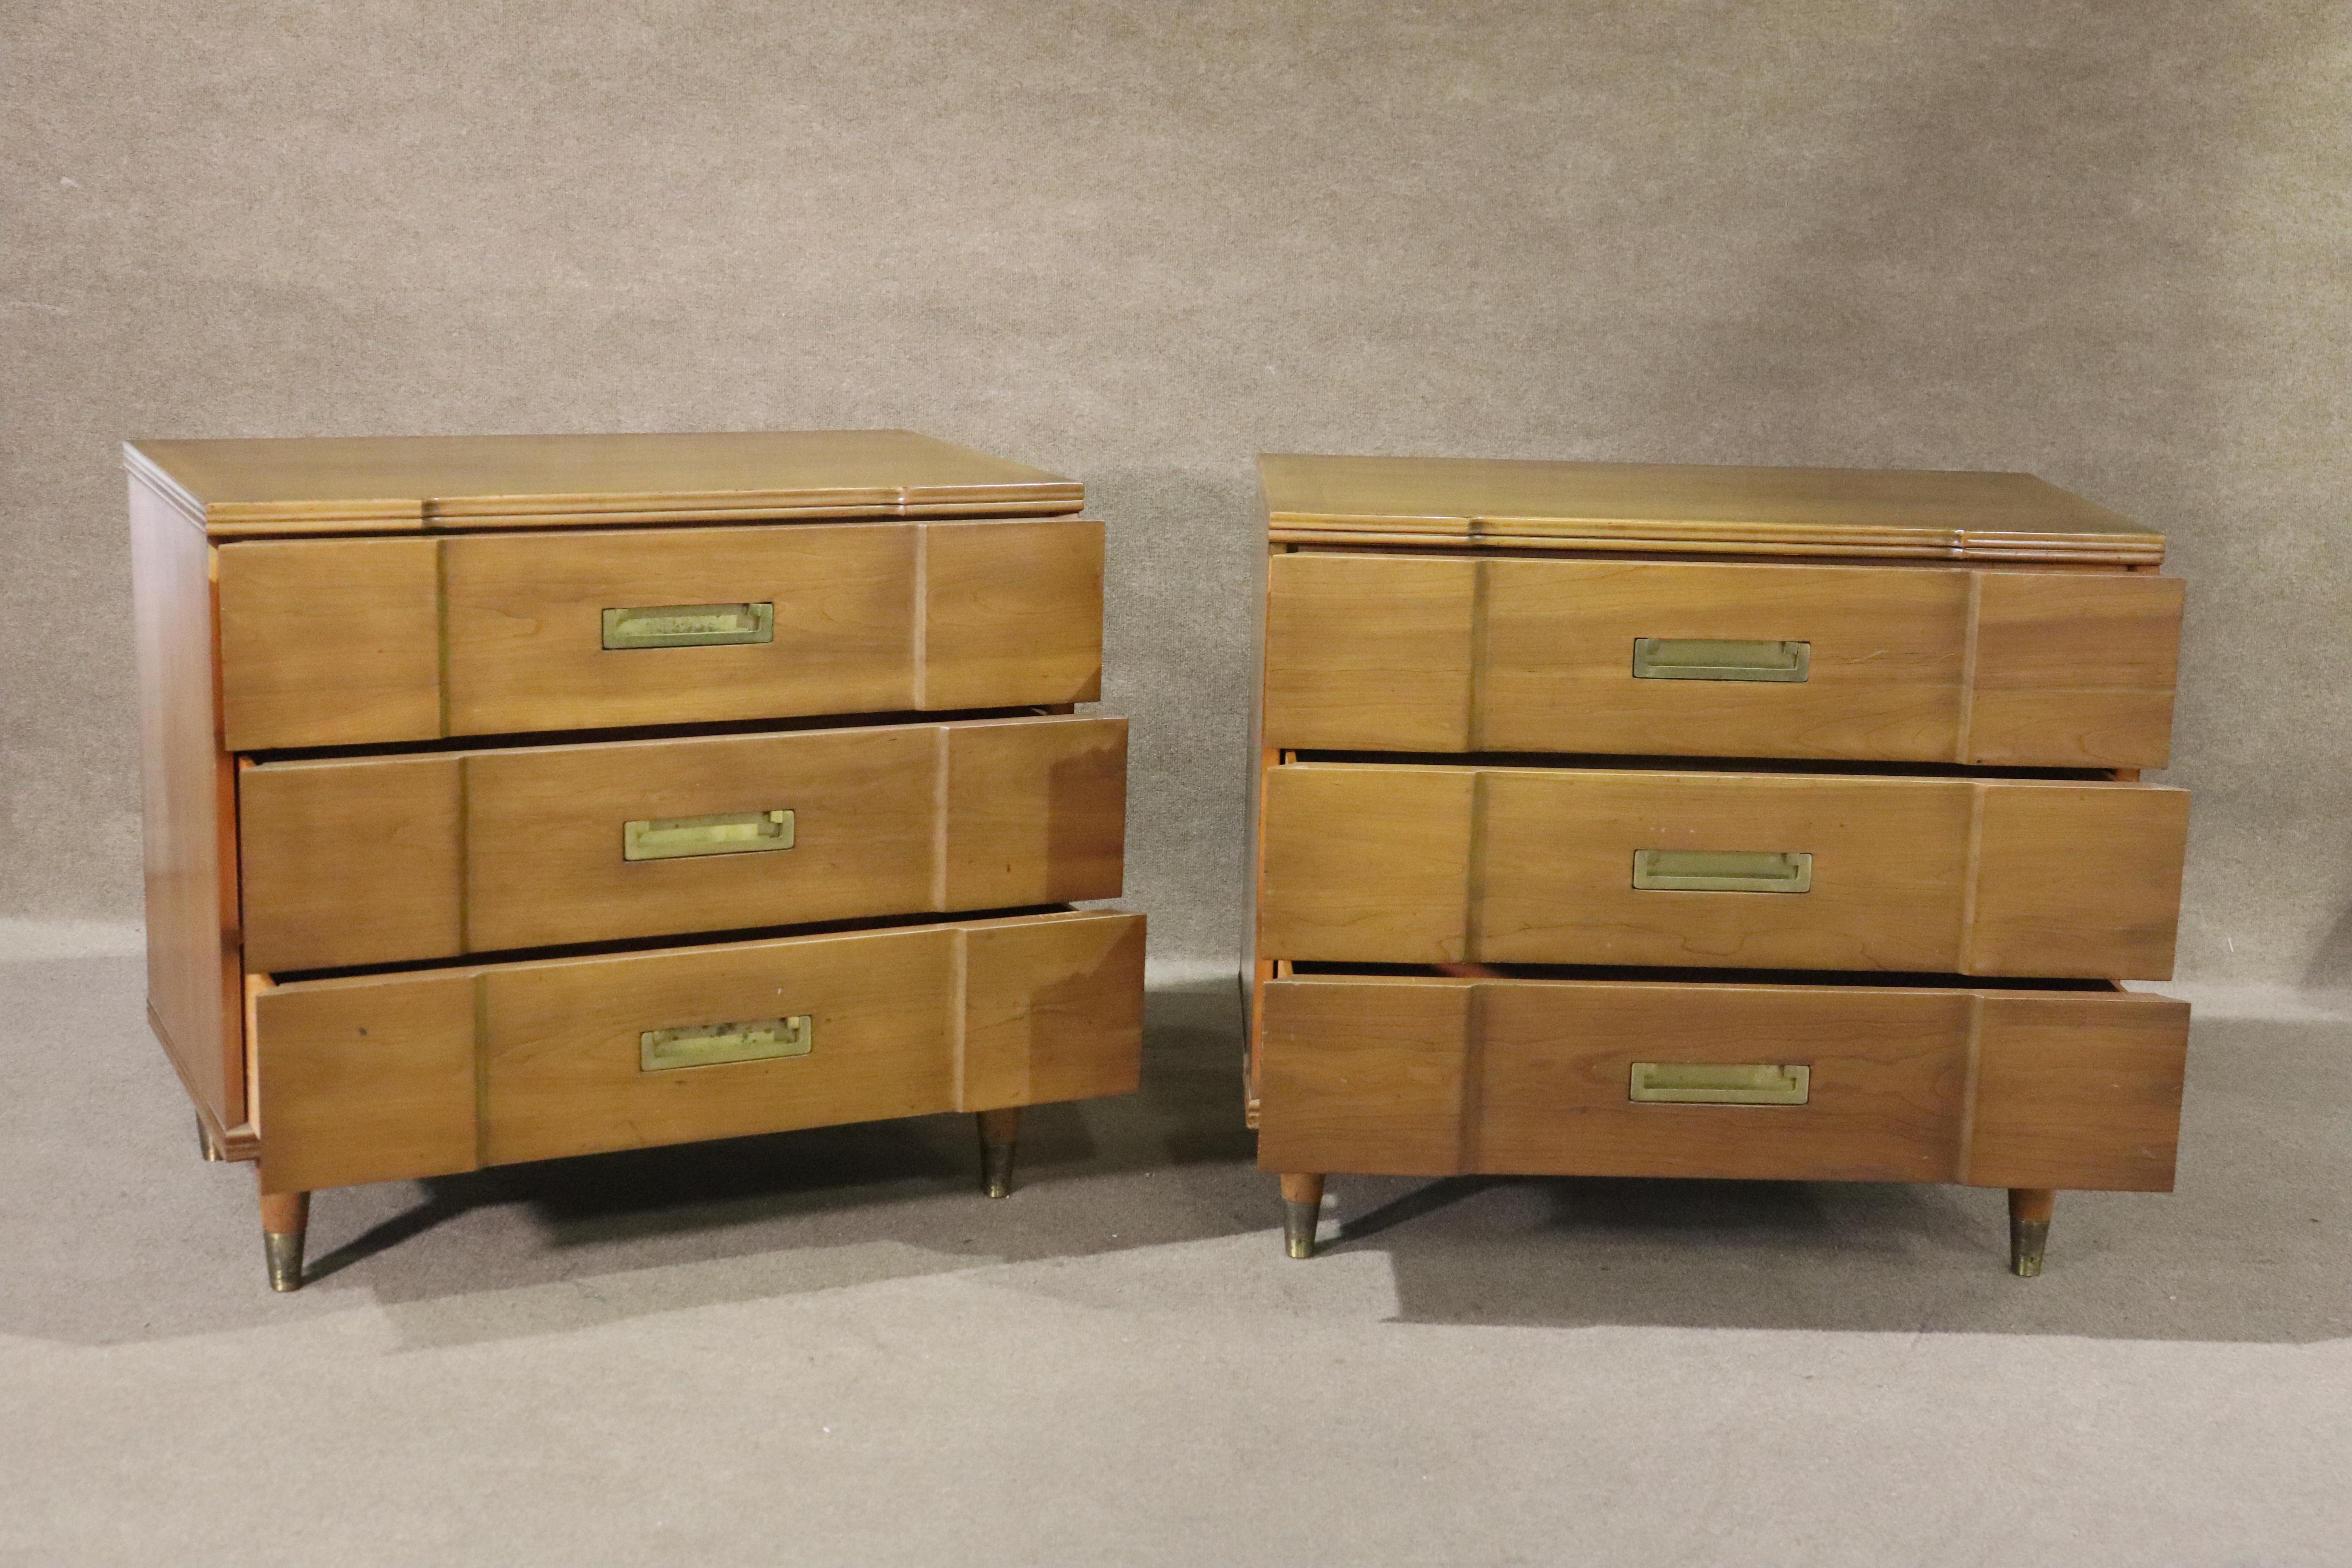 Pair of matching chests made by John Widdicomb. Original brass hardware compliments a superlative finish on choice fruitwood. Great style and form.
Please confirm location NY or NJ